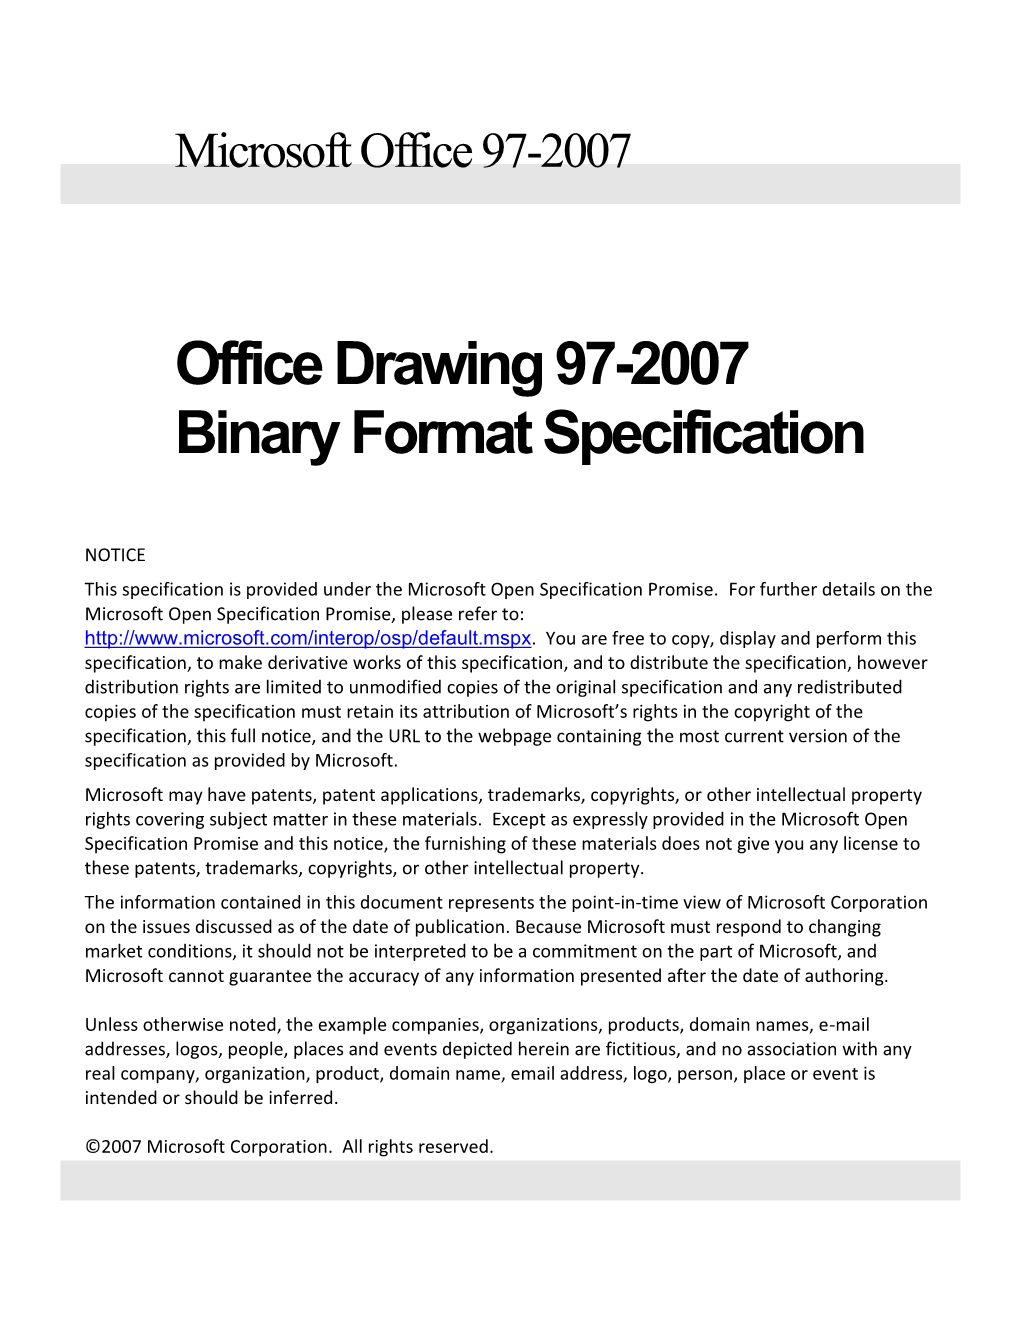 Office Drawing 97-2007 Binary Format Specification